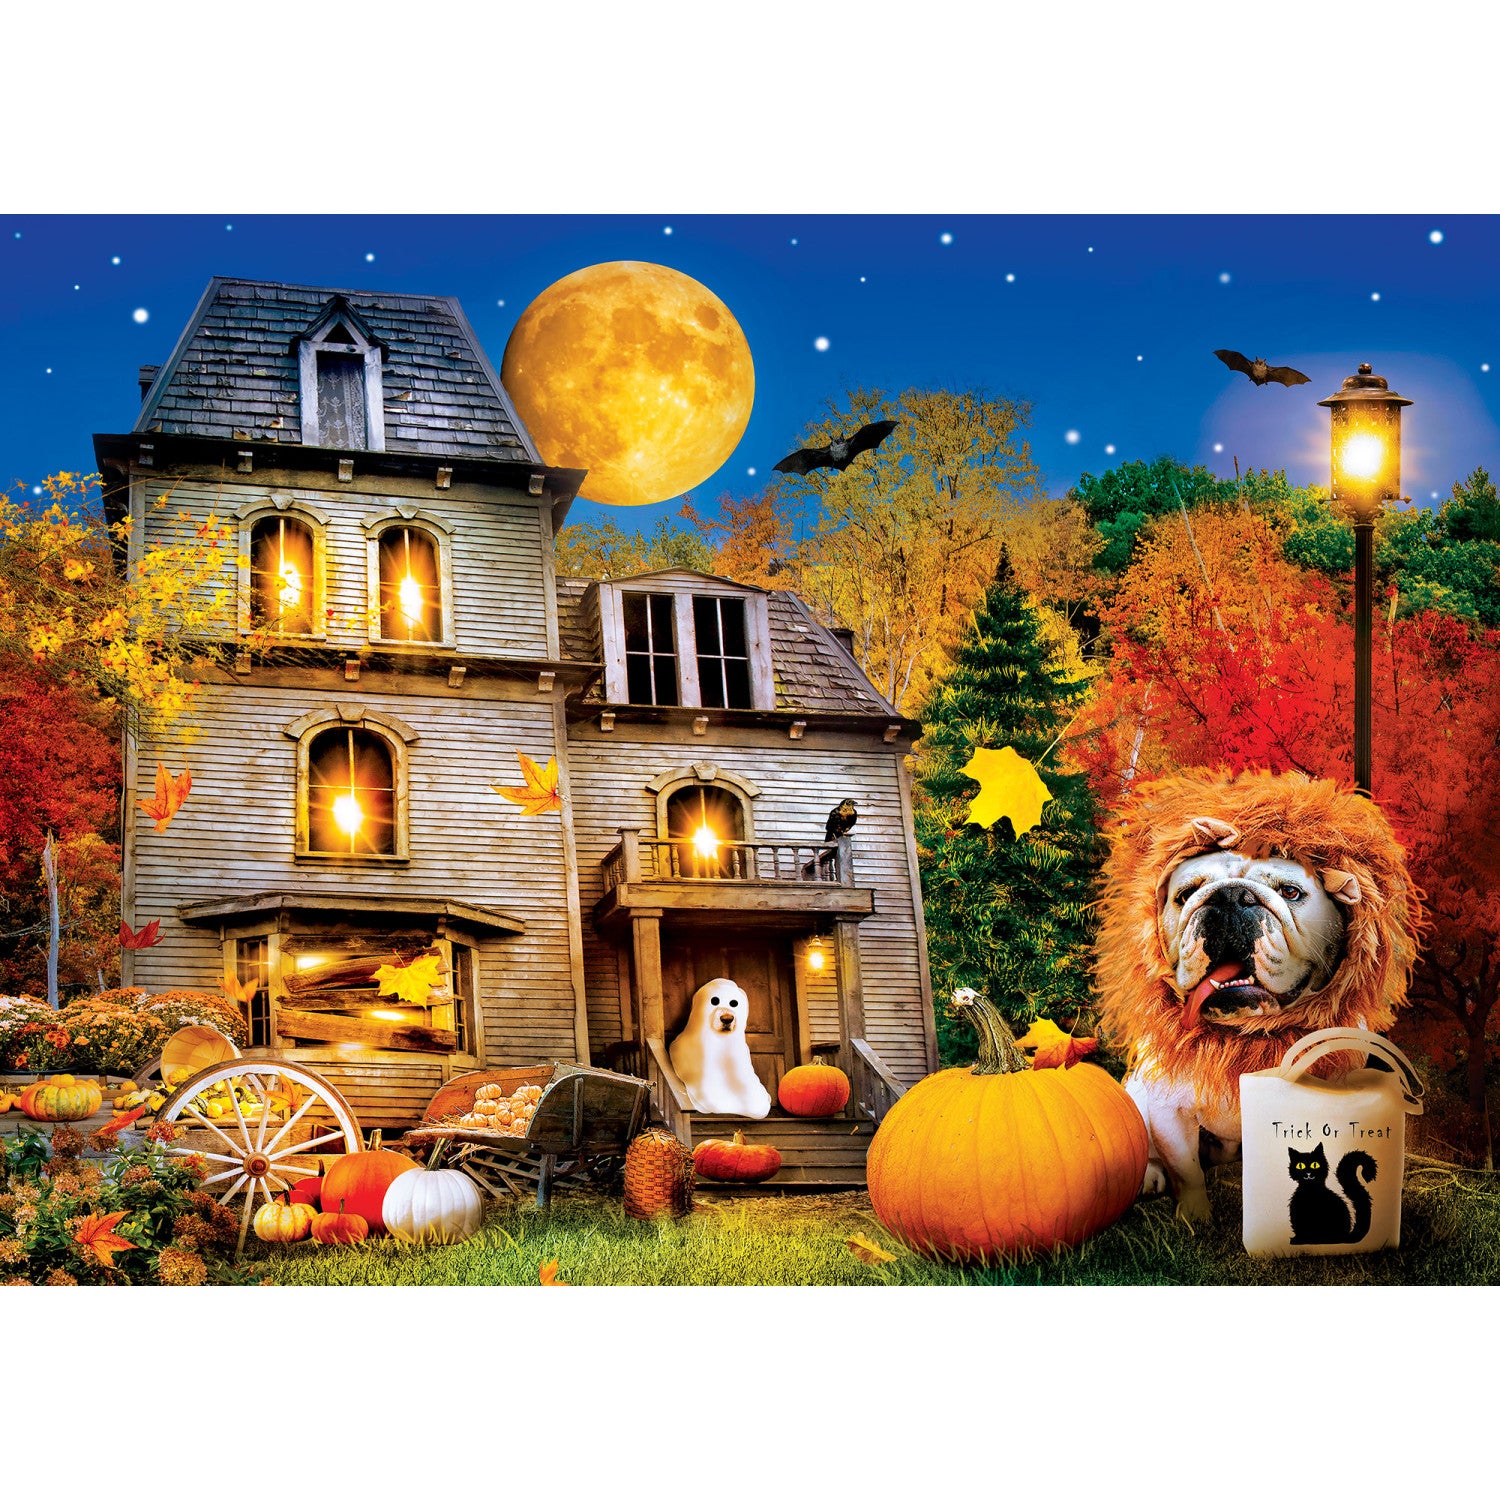 Glow in the Dark Halloween - Trick or Treat 500 Piece Puzzle